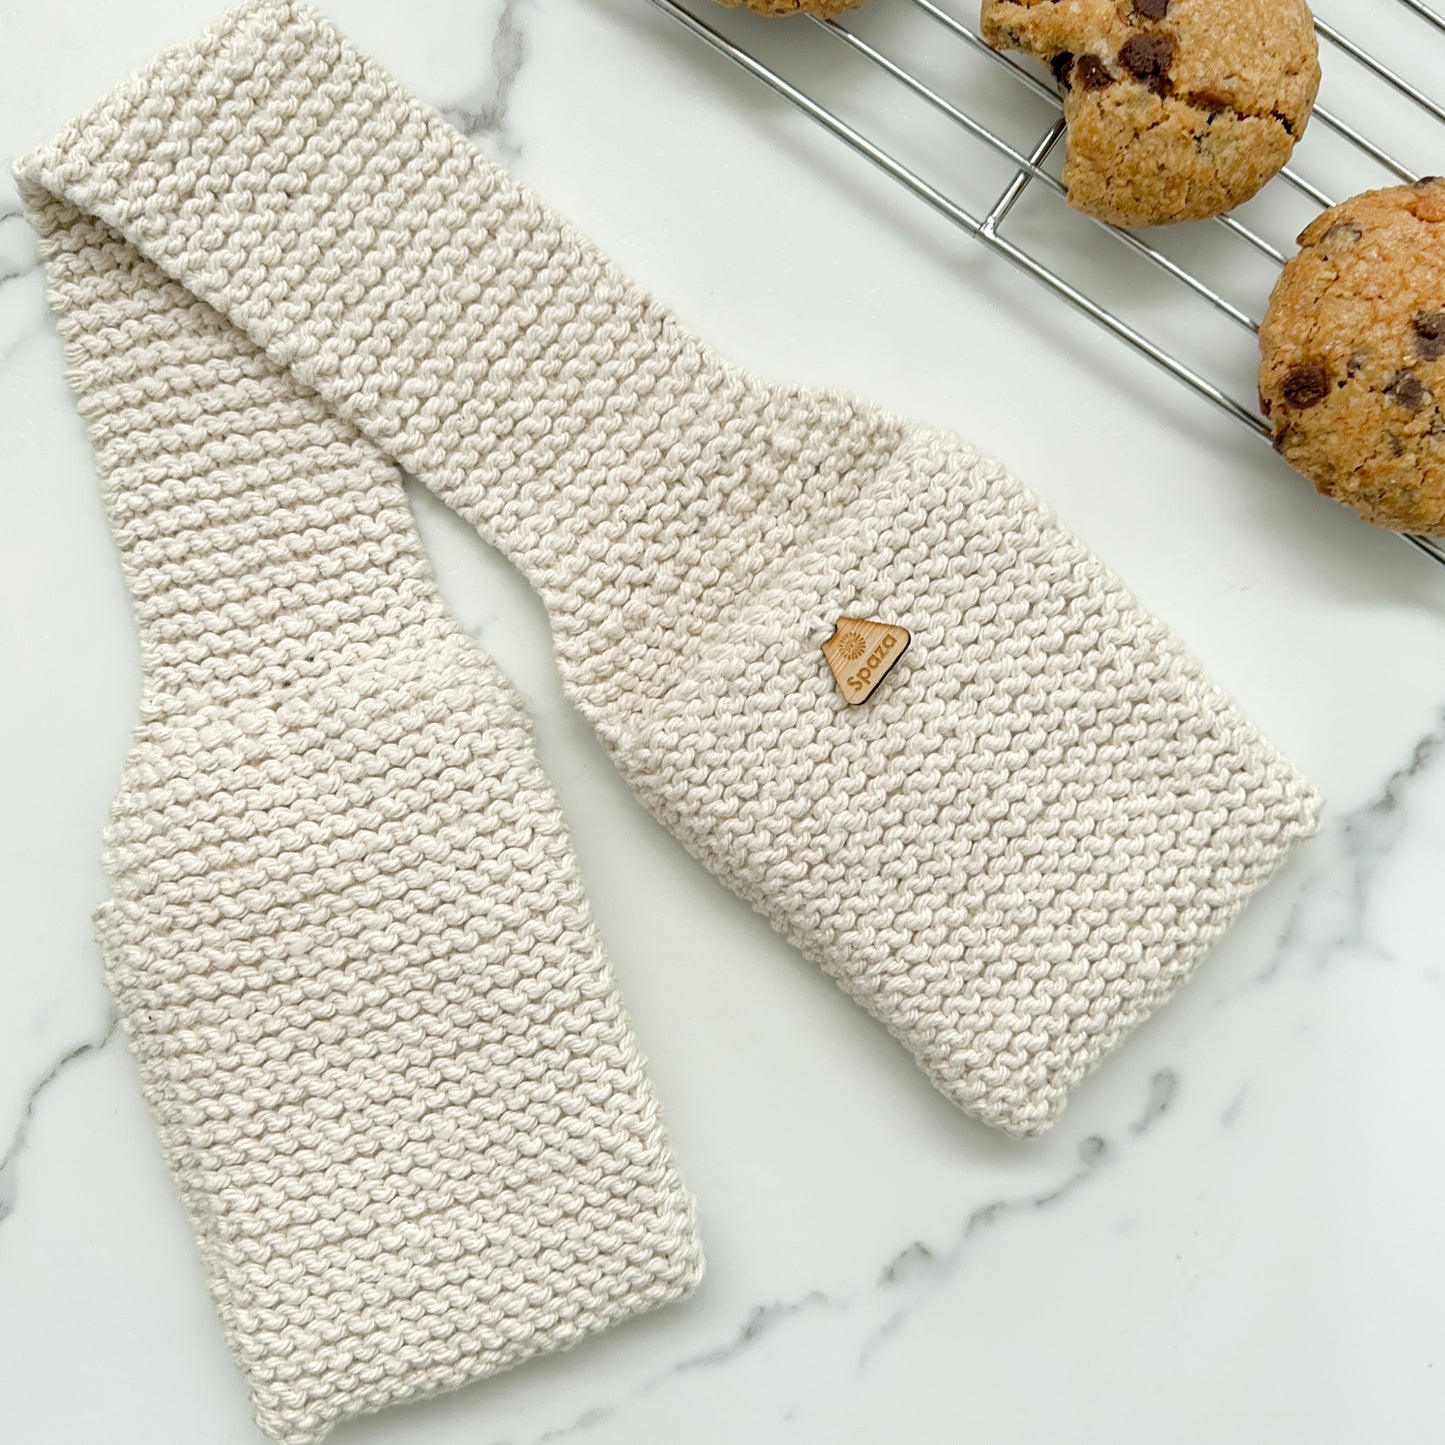 Double Oven Mitts, hand knit cotton, eco-friendly, fair trade amazing heat resistance.